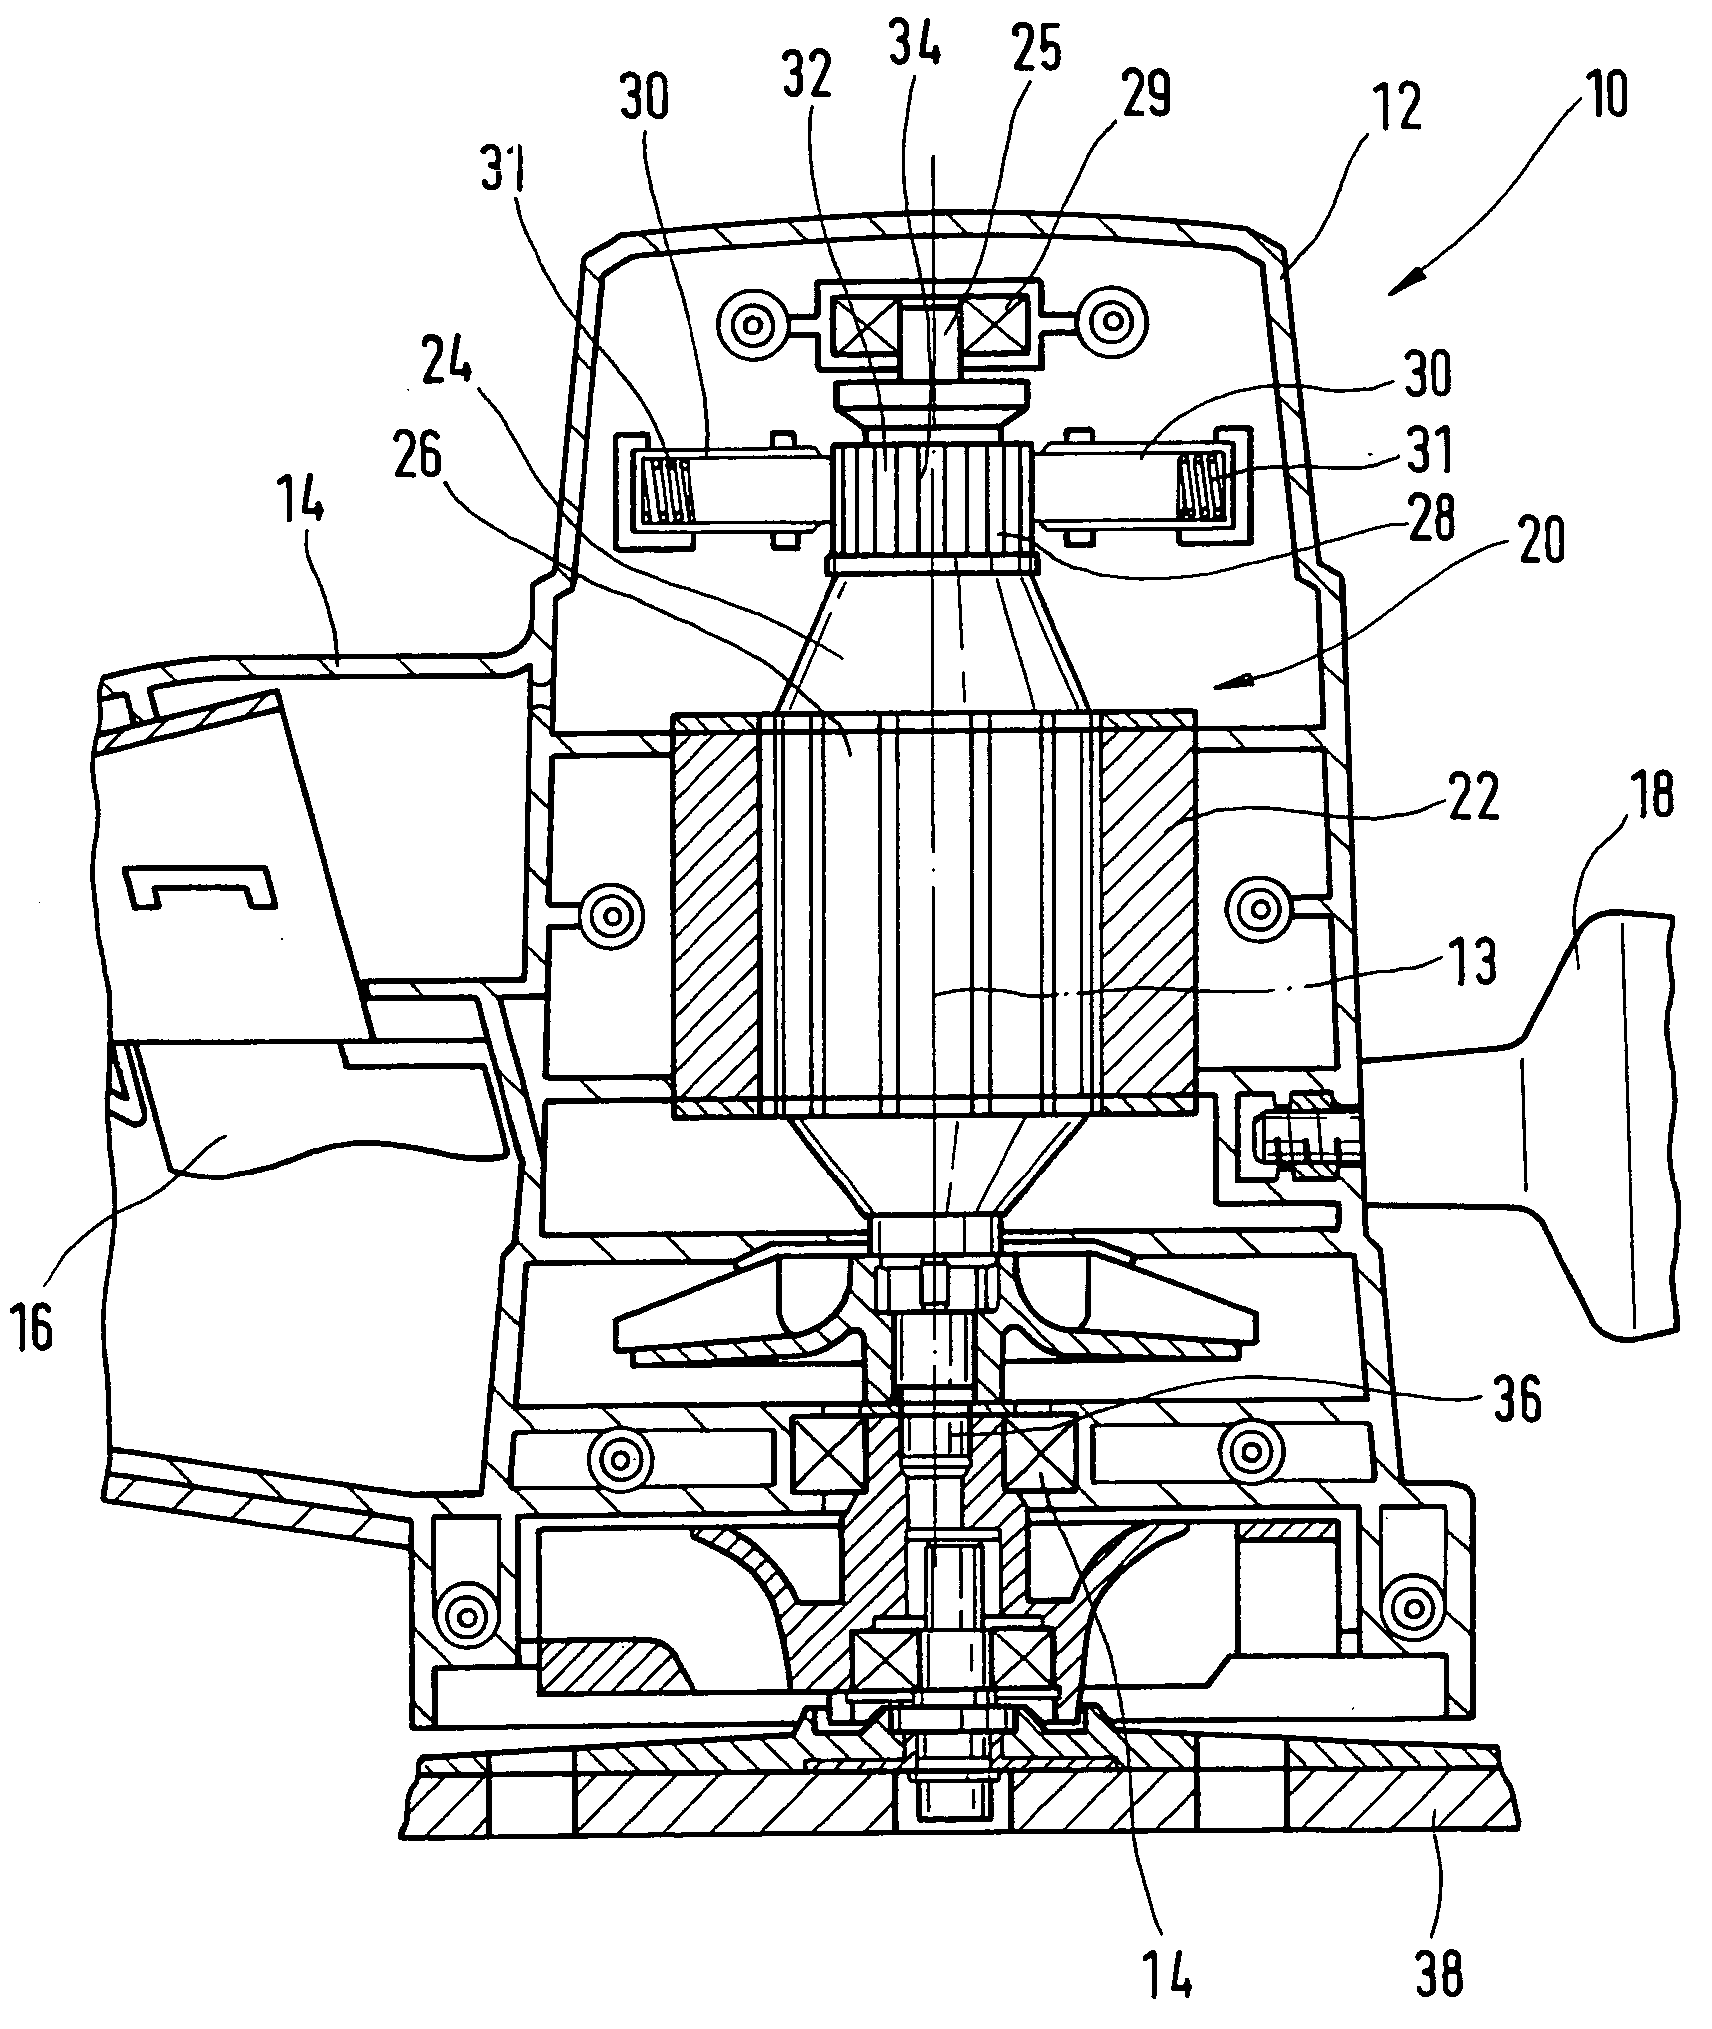 Electric manual machine tool driven by an electric motor